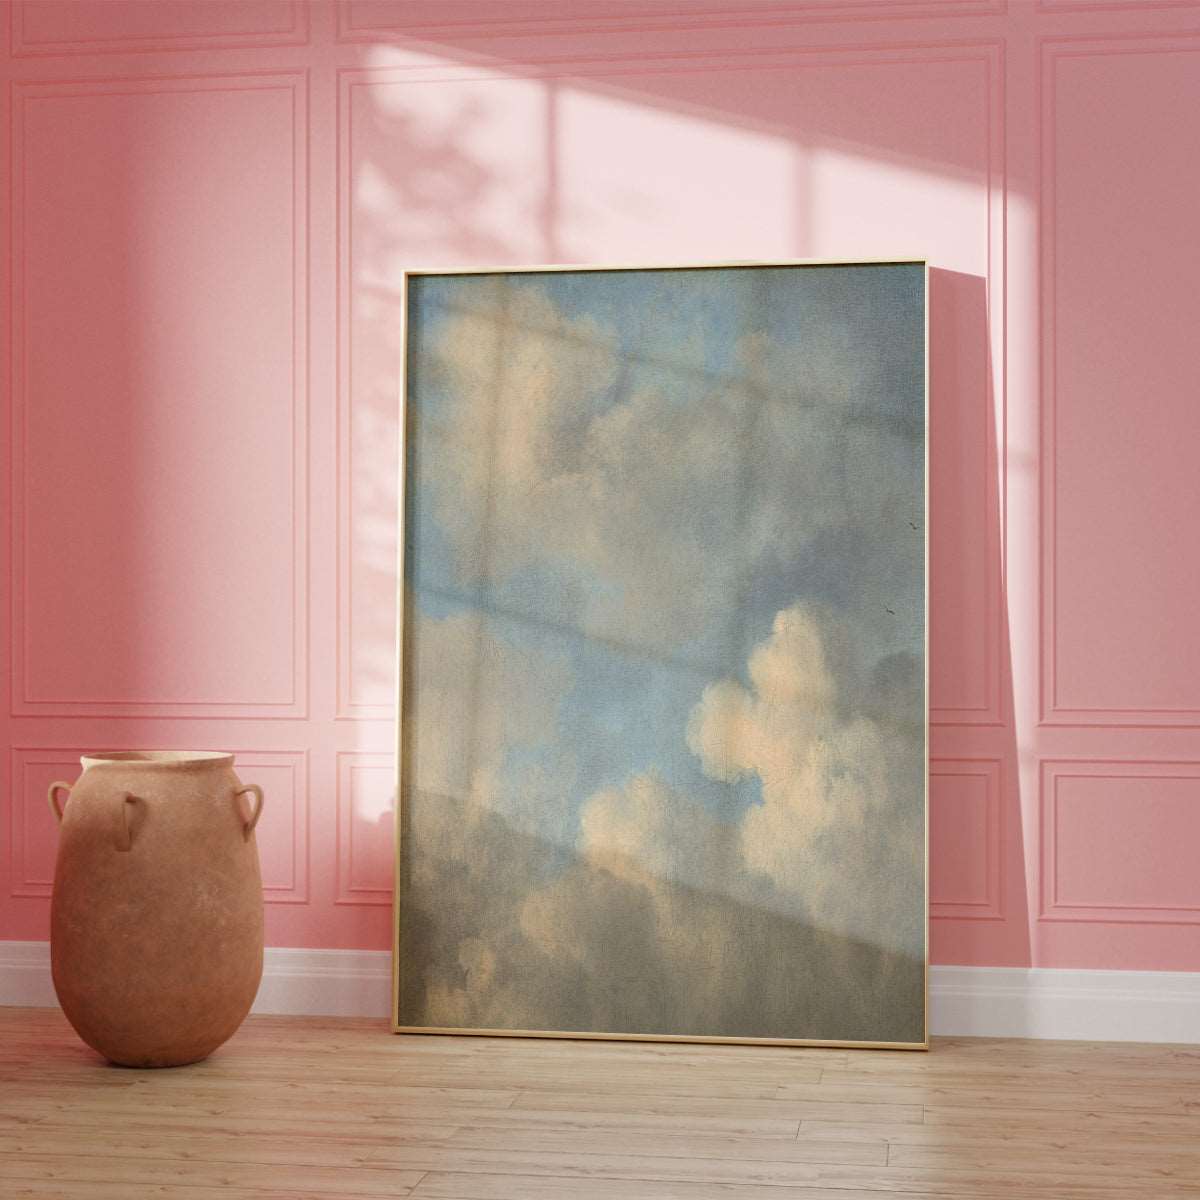 Cloudscape Wall Poster Print